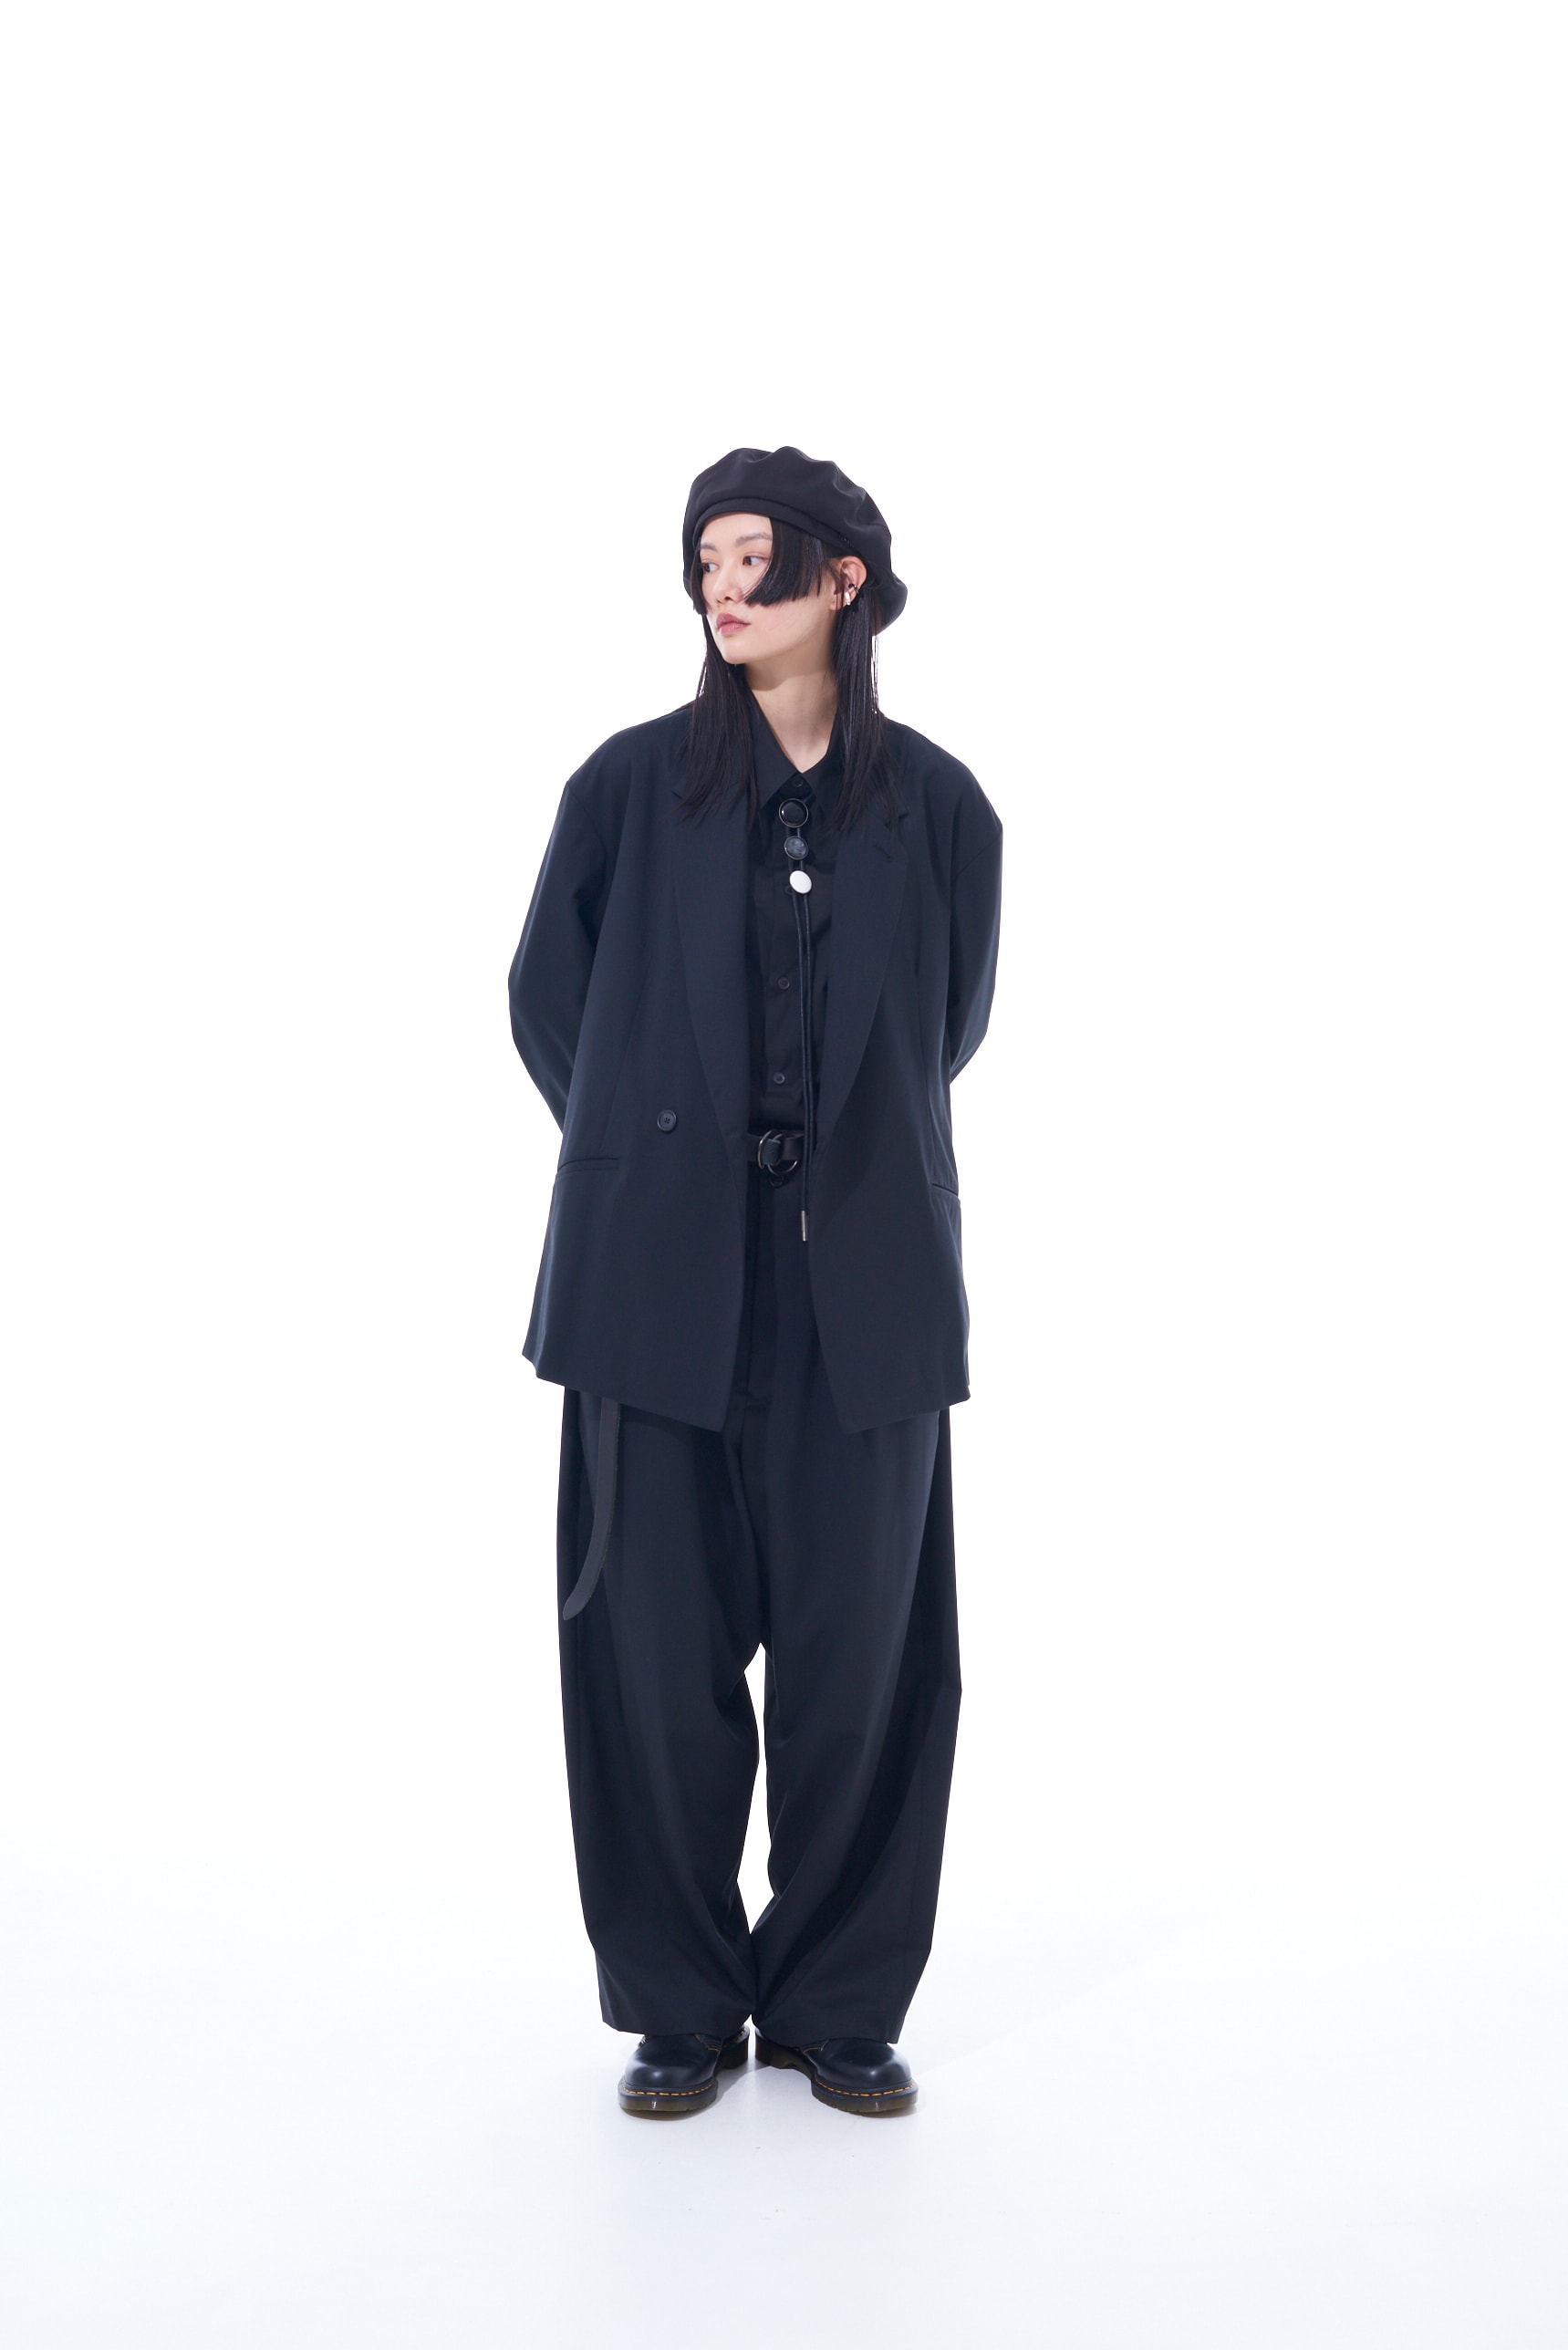 T/W GABARDINE SUSPENDER PANTS WITH TRIANGLE GUSSET